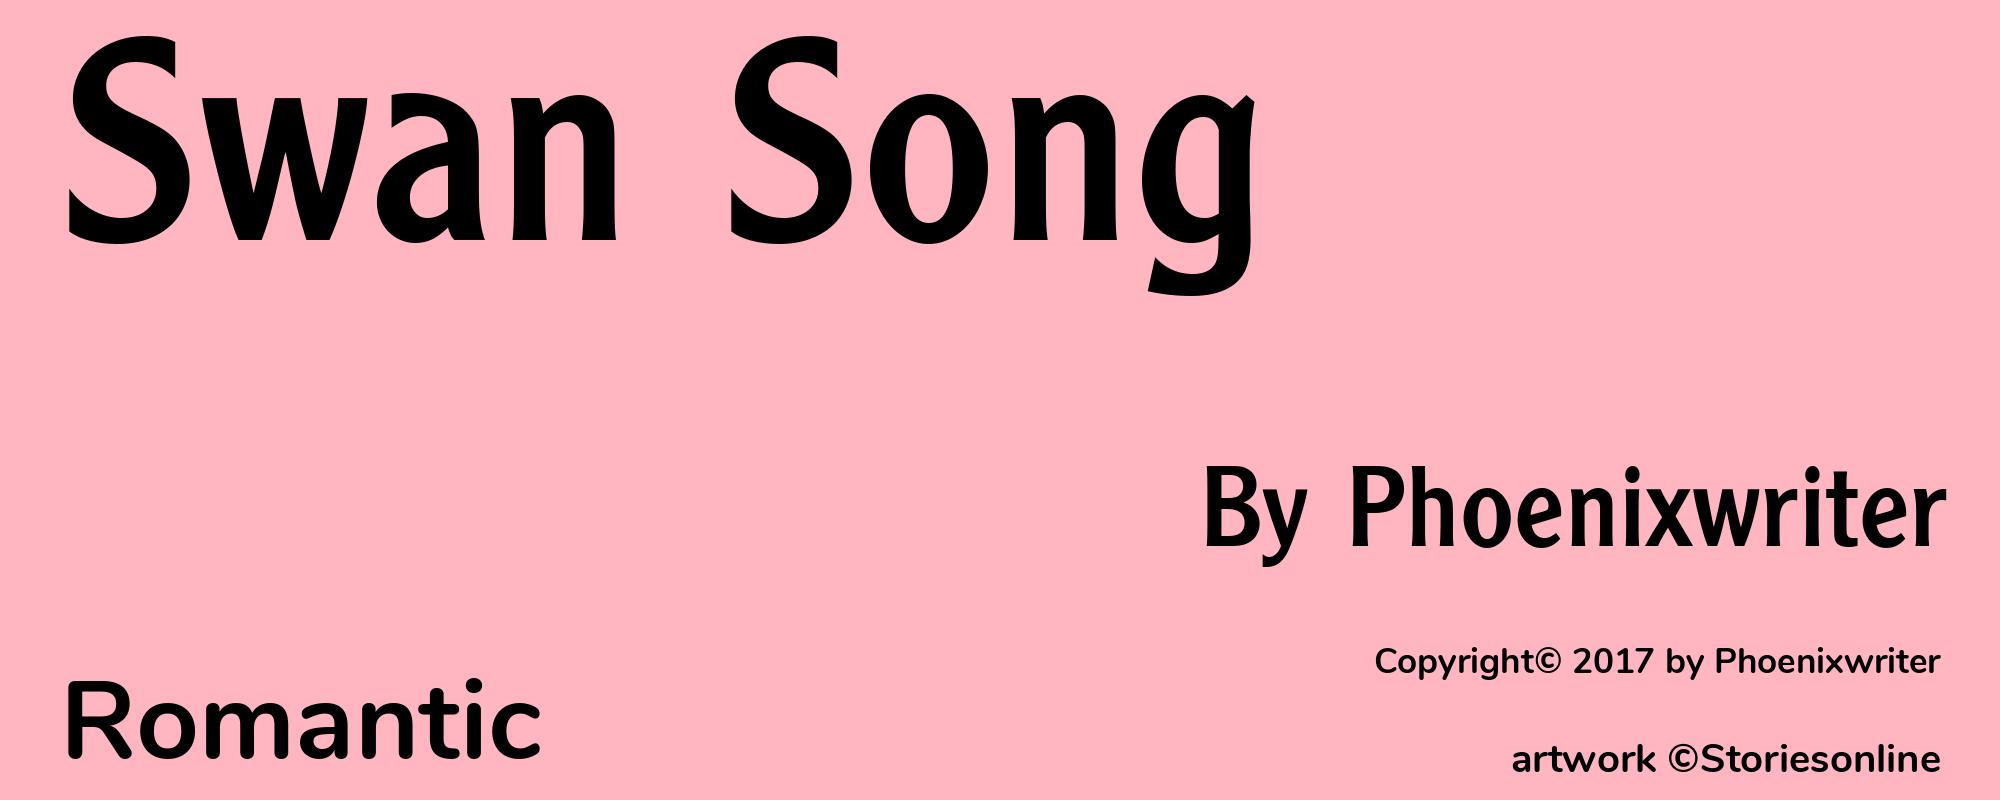 Swan Song - Cover